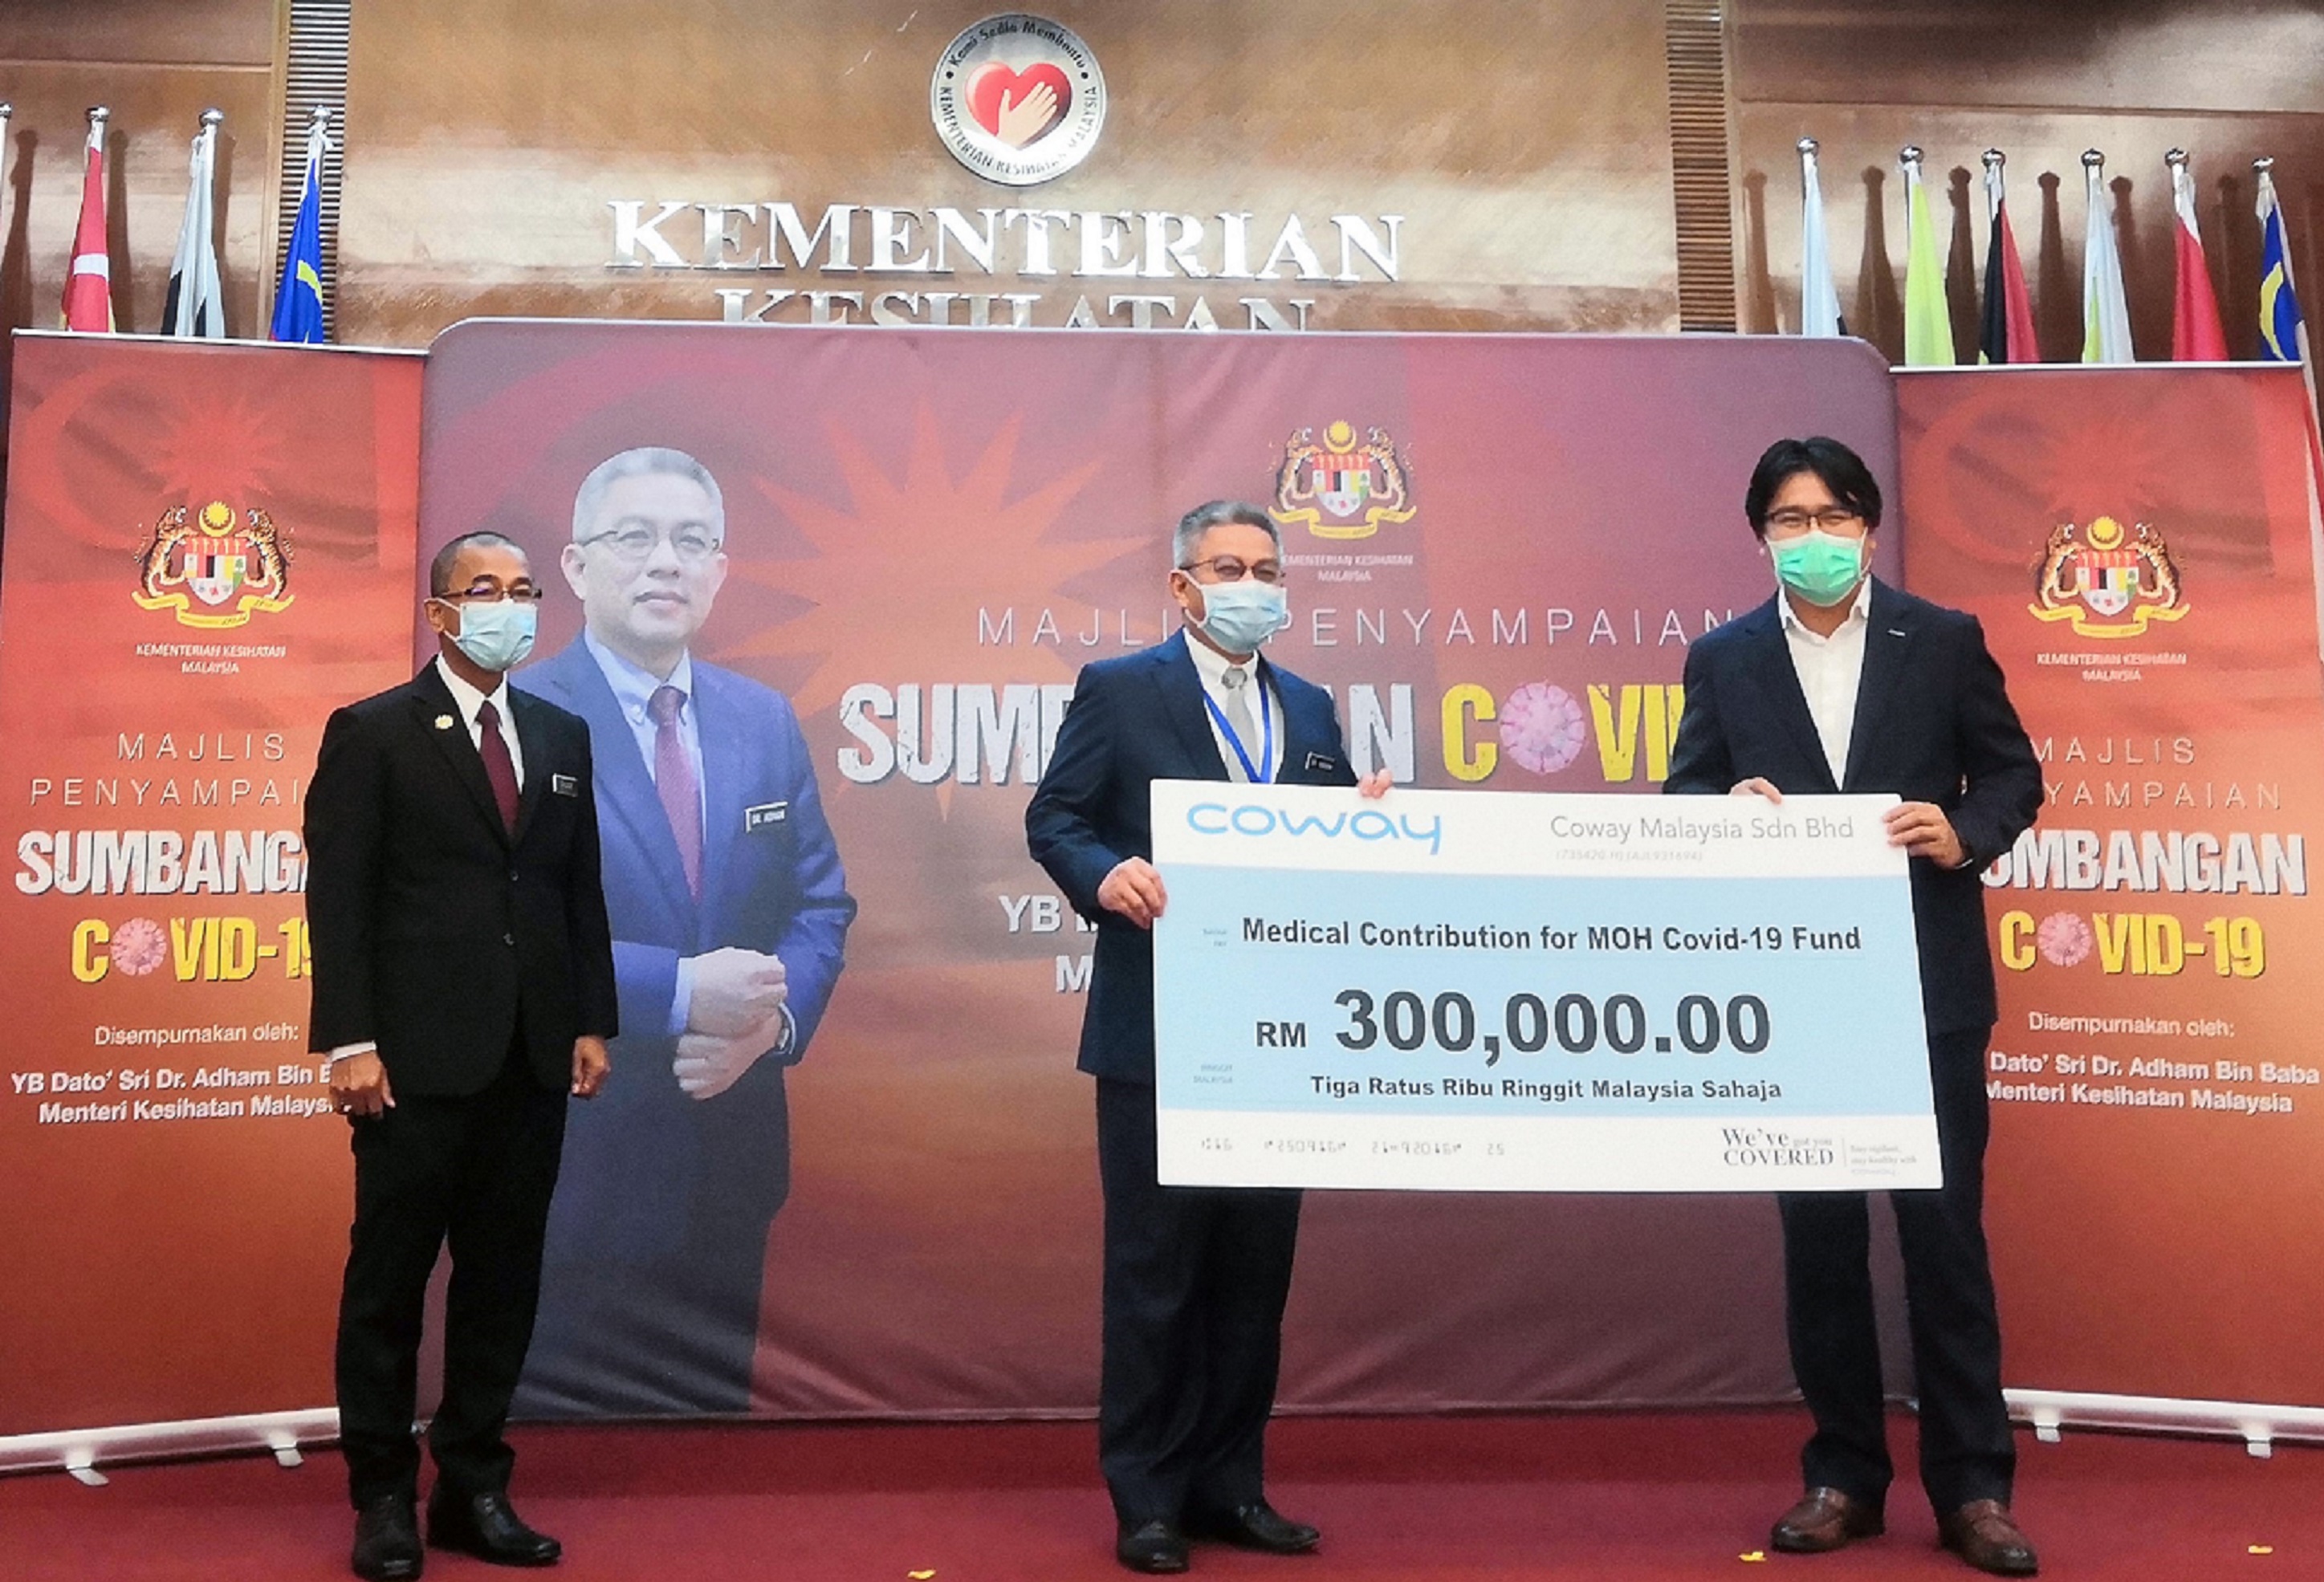 Coway Malaysia - Donated RM300,000 to Ministry of Health’s (MOH) COVID-19 Fund